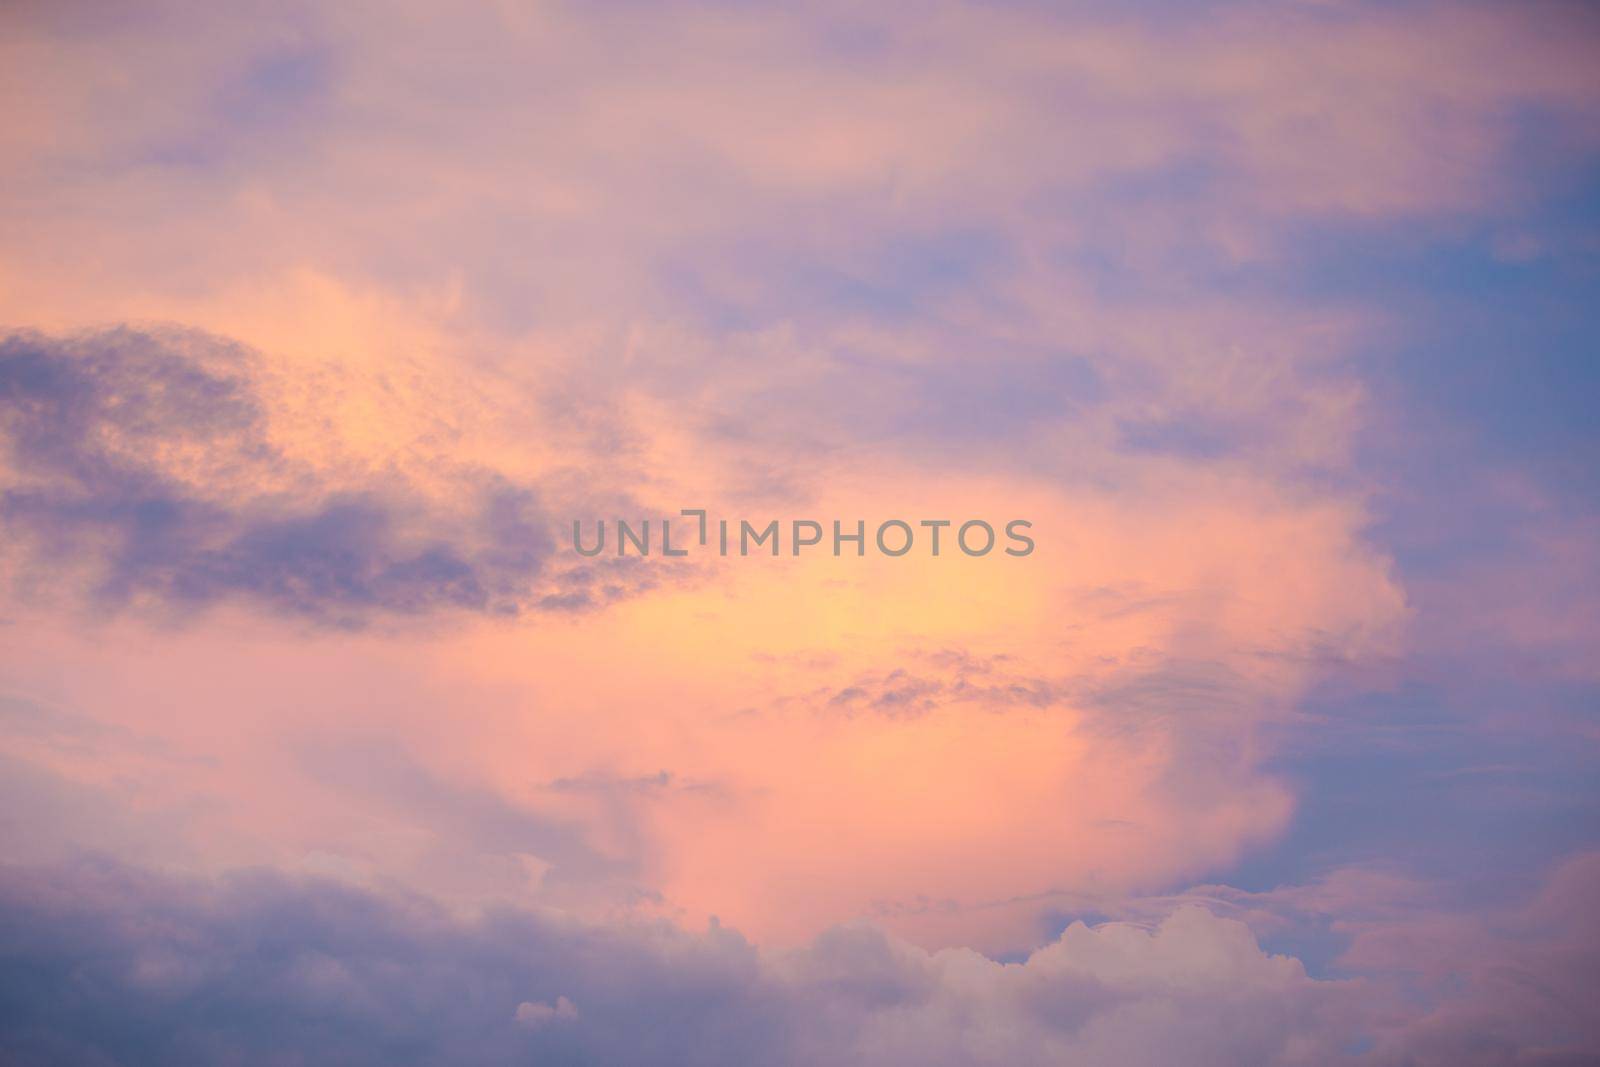 Sunset sky with colorful clouds. Blue colors merge with soft orange.